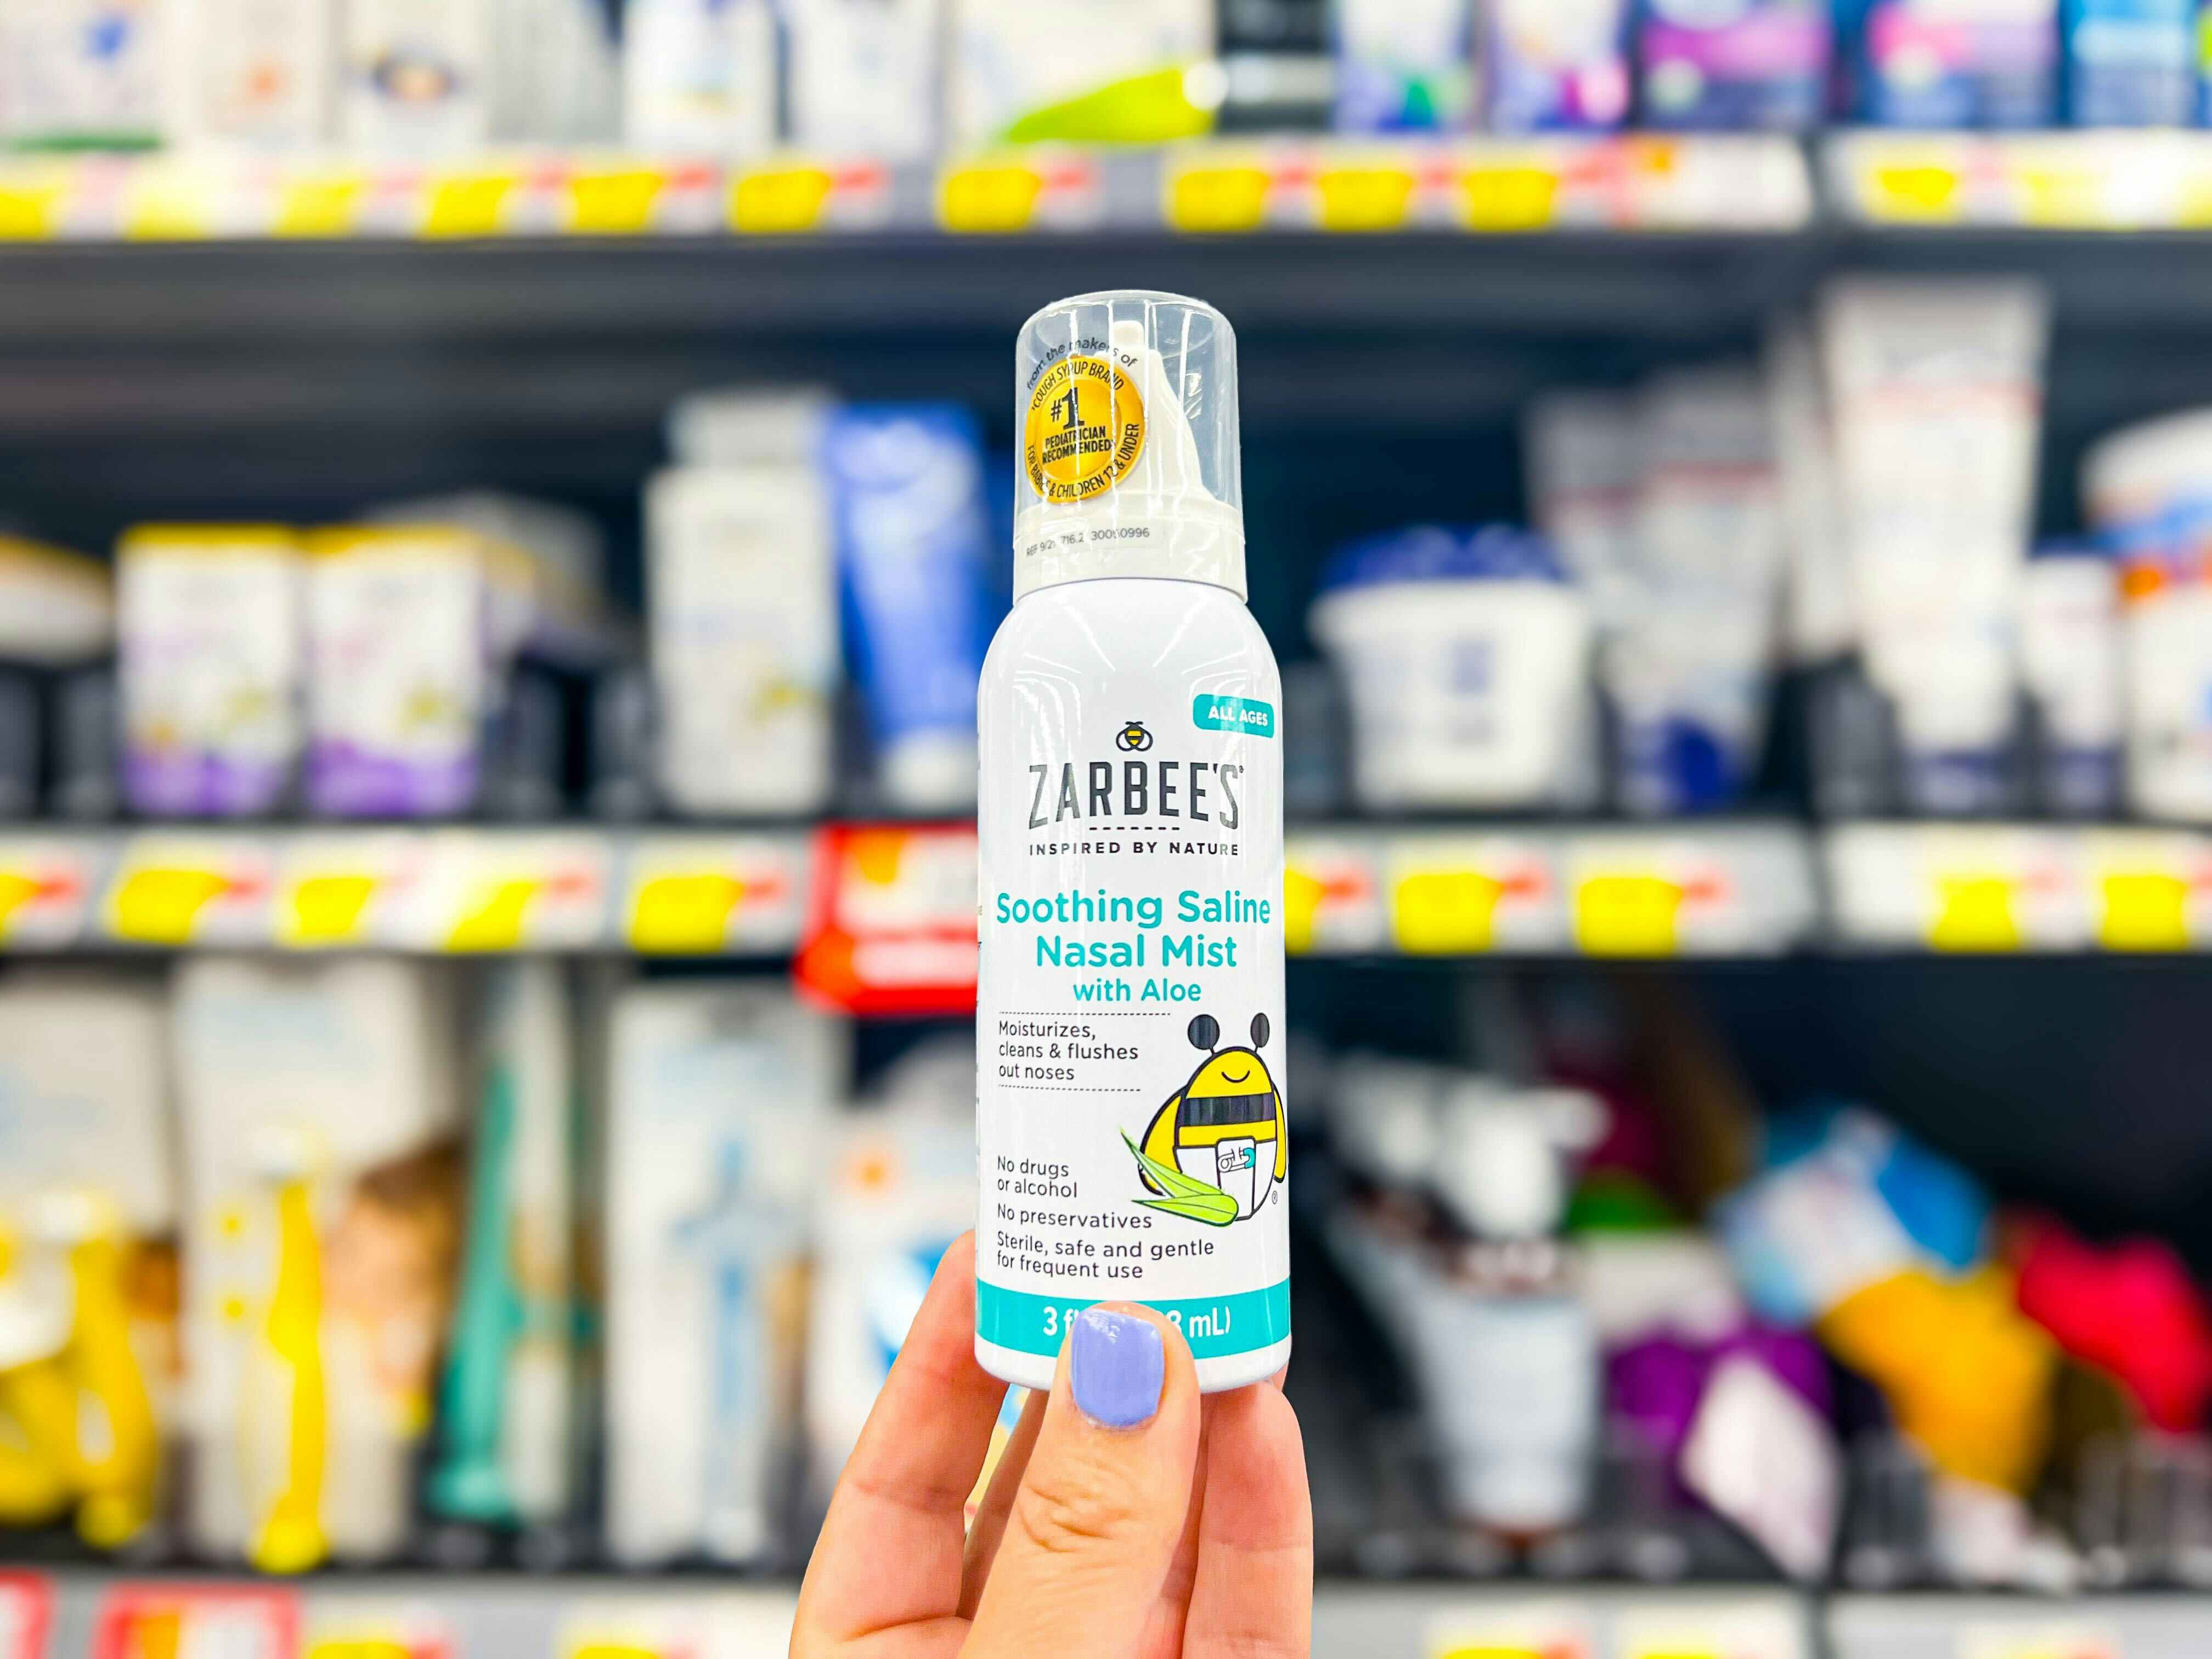 Use a Walmart Cash Offer to Score Baby Zarbees Nasal Mist for Just $3.78